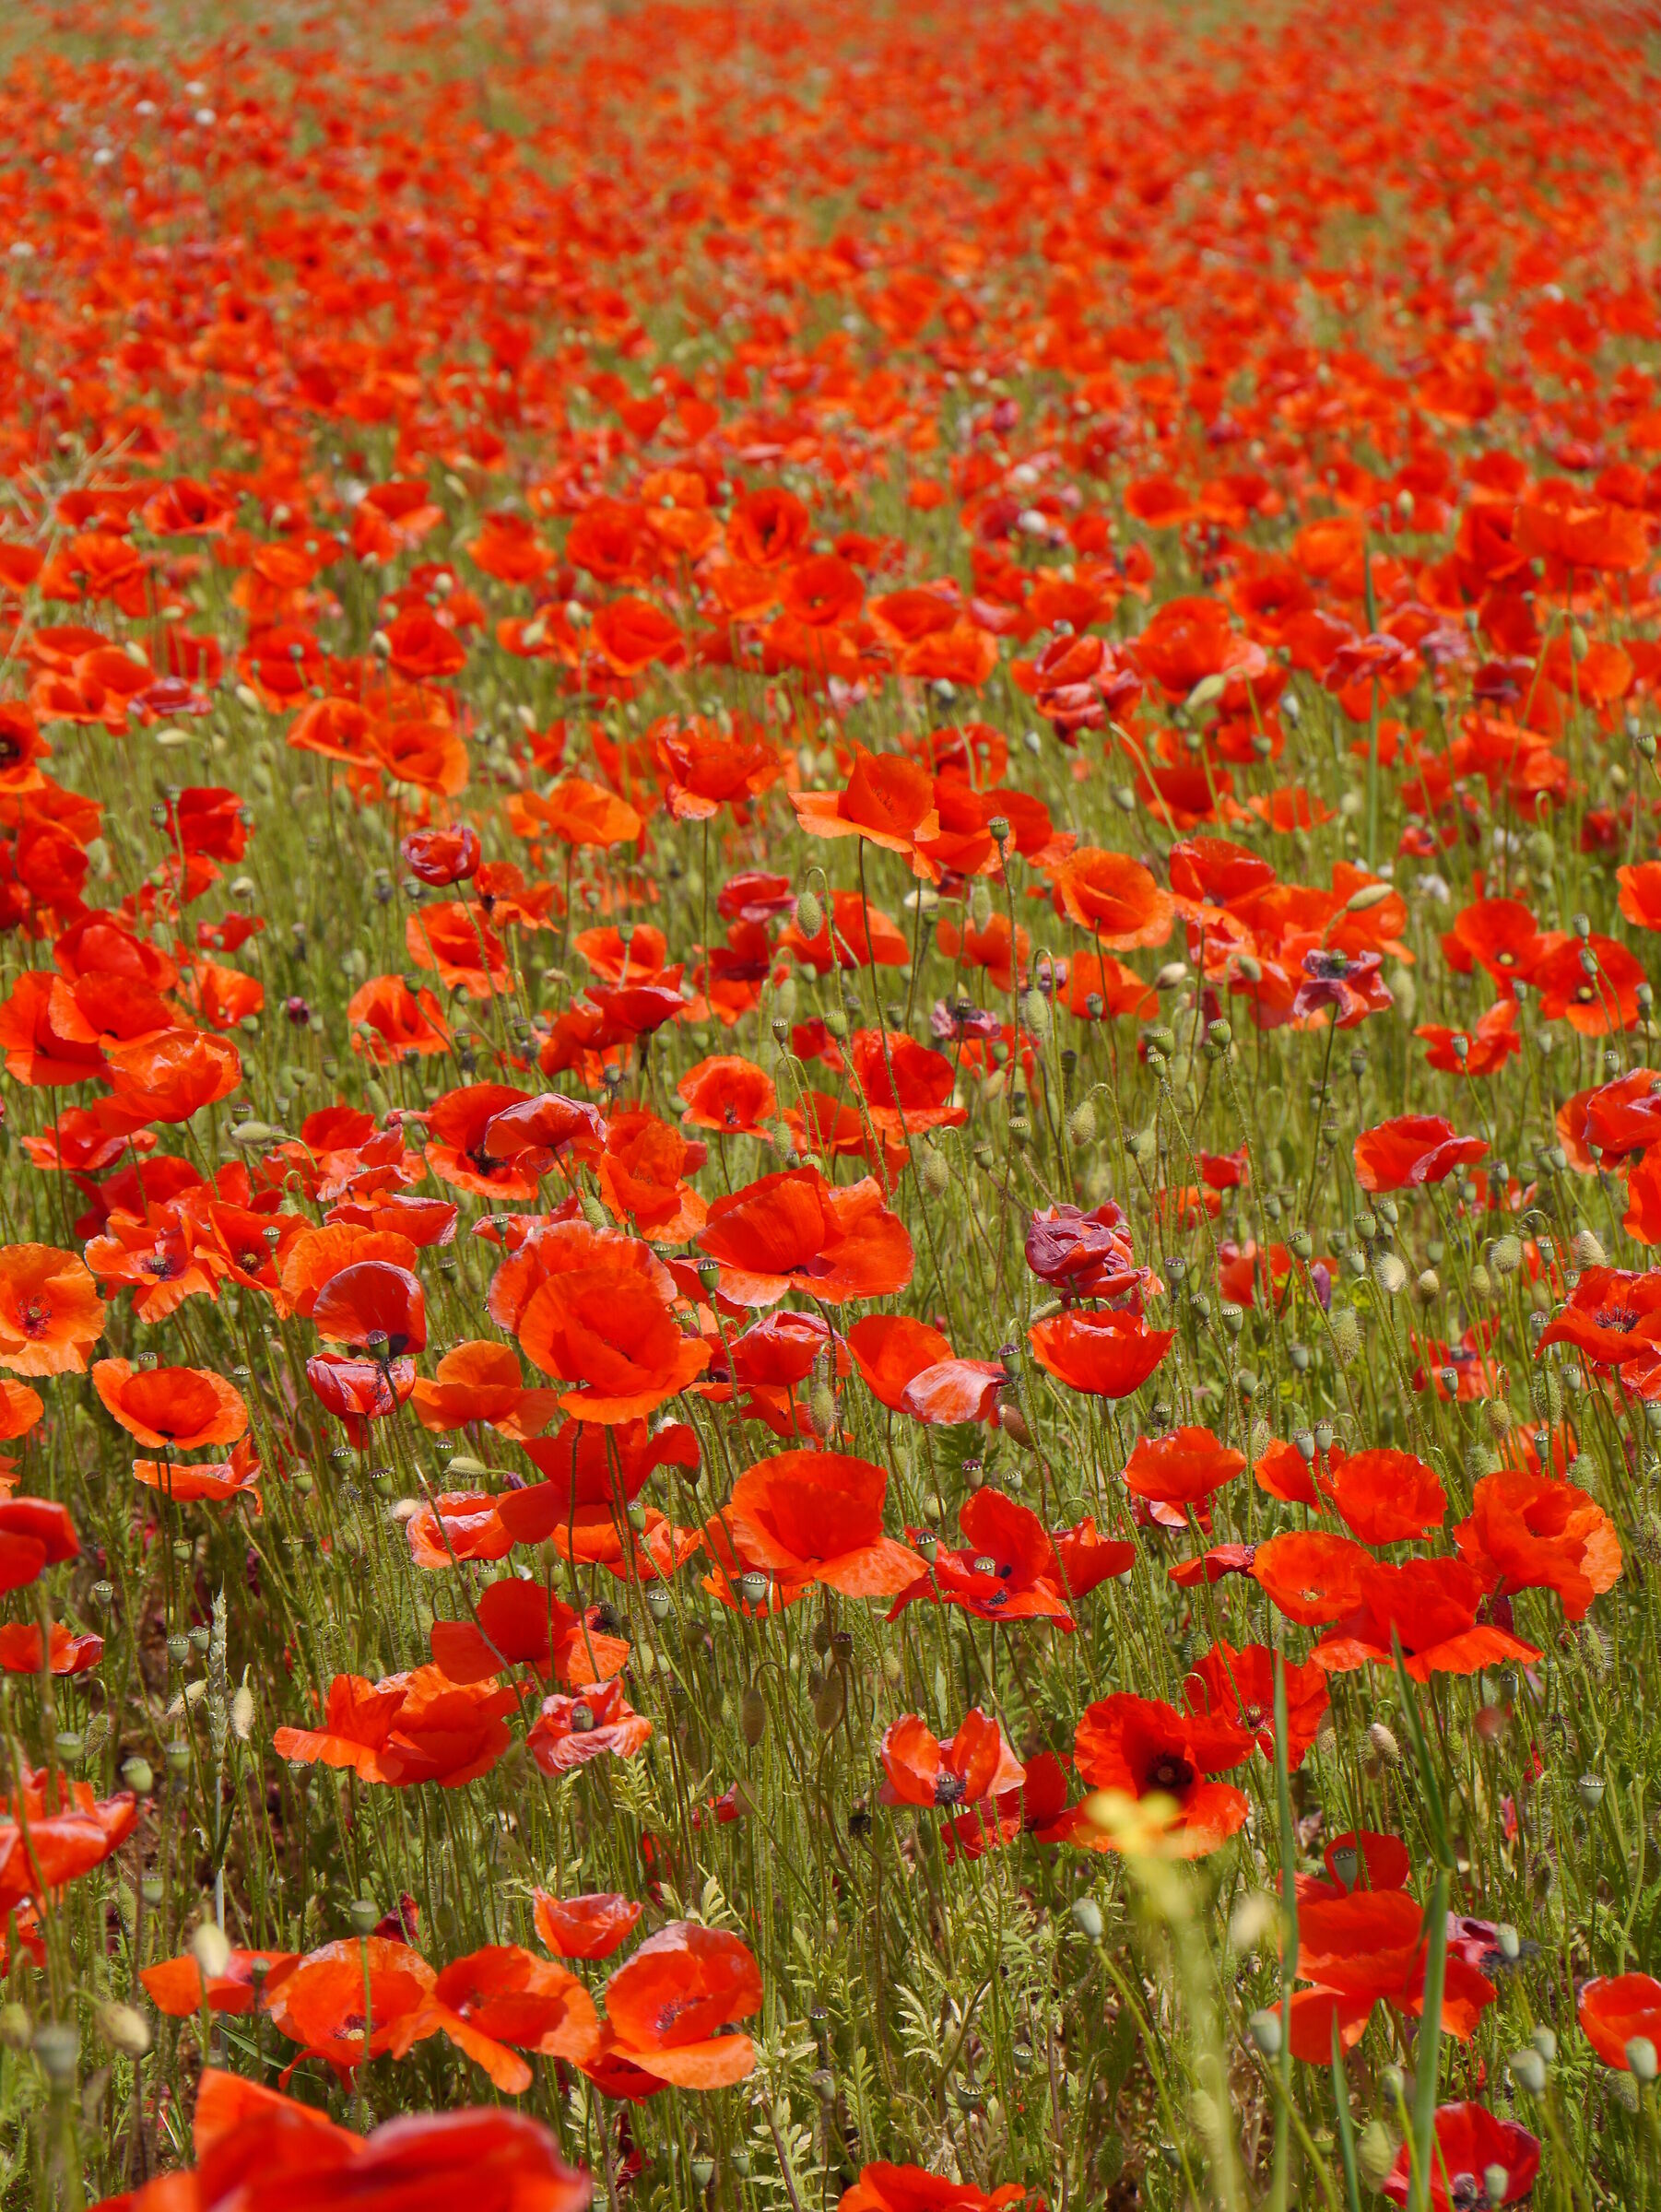 they are a thousand red poppies......